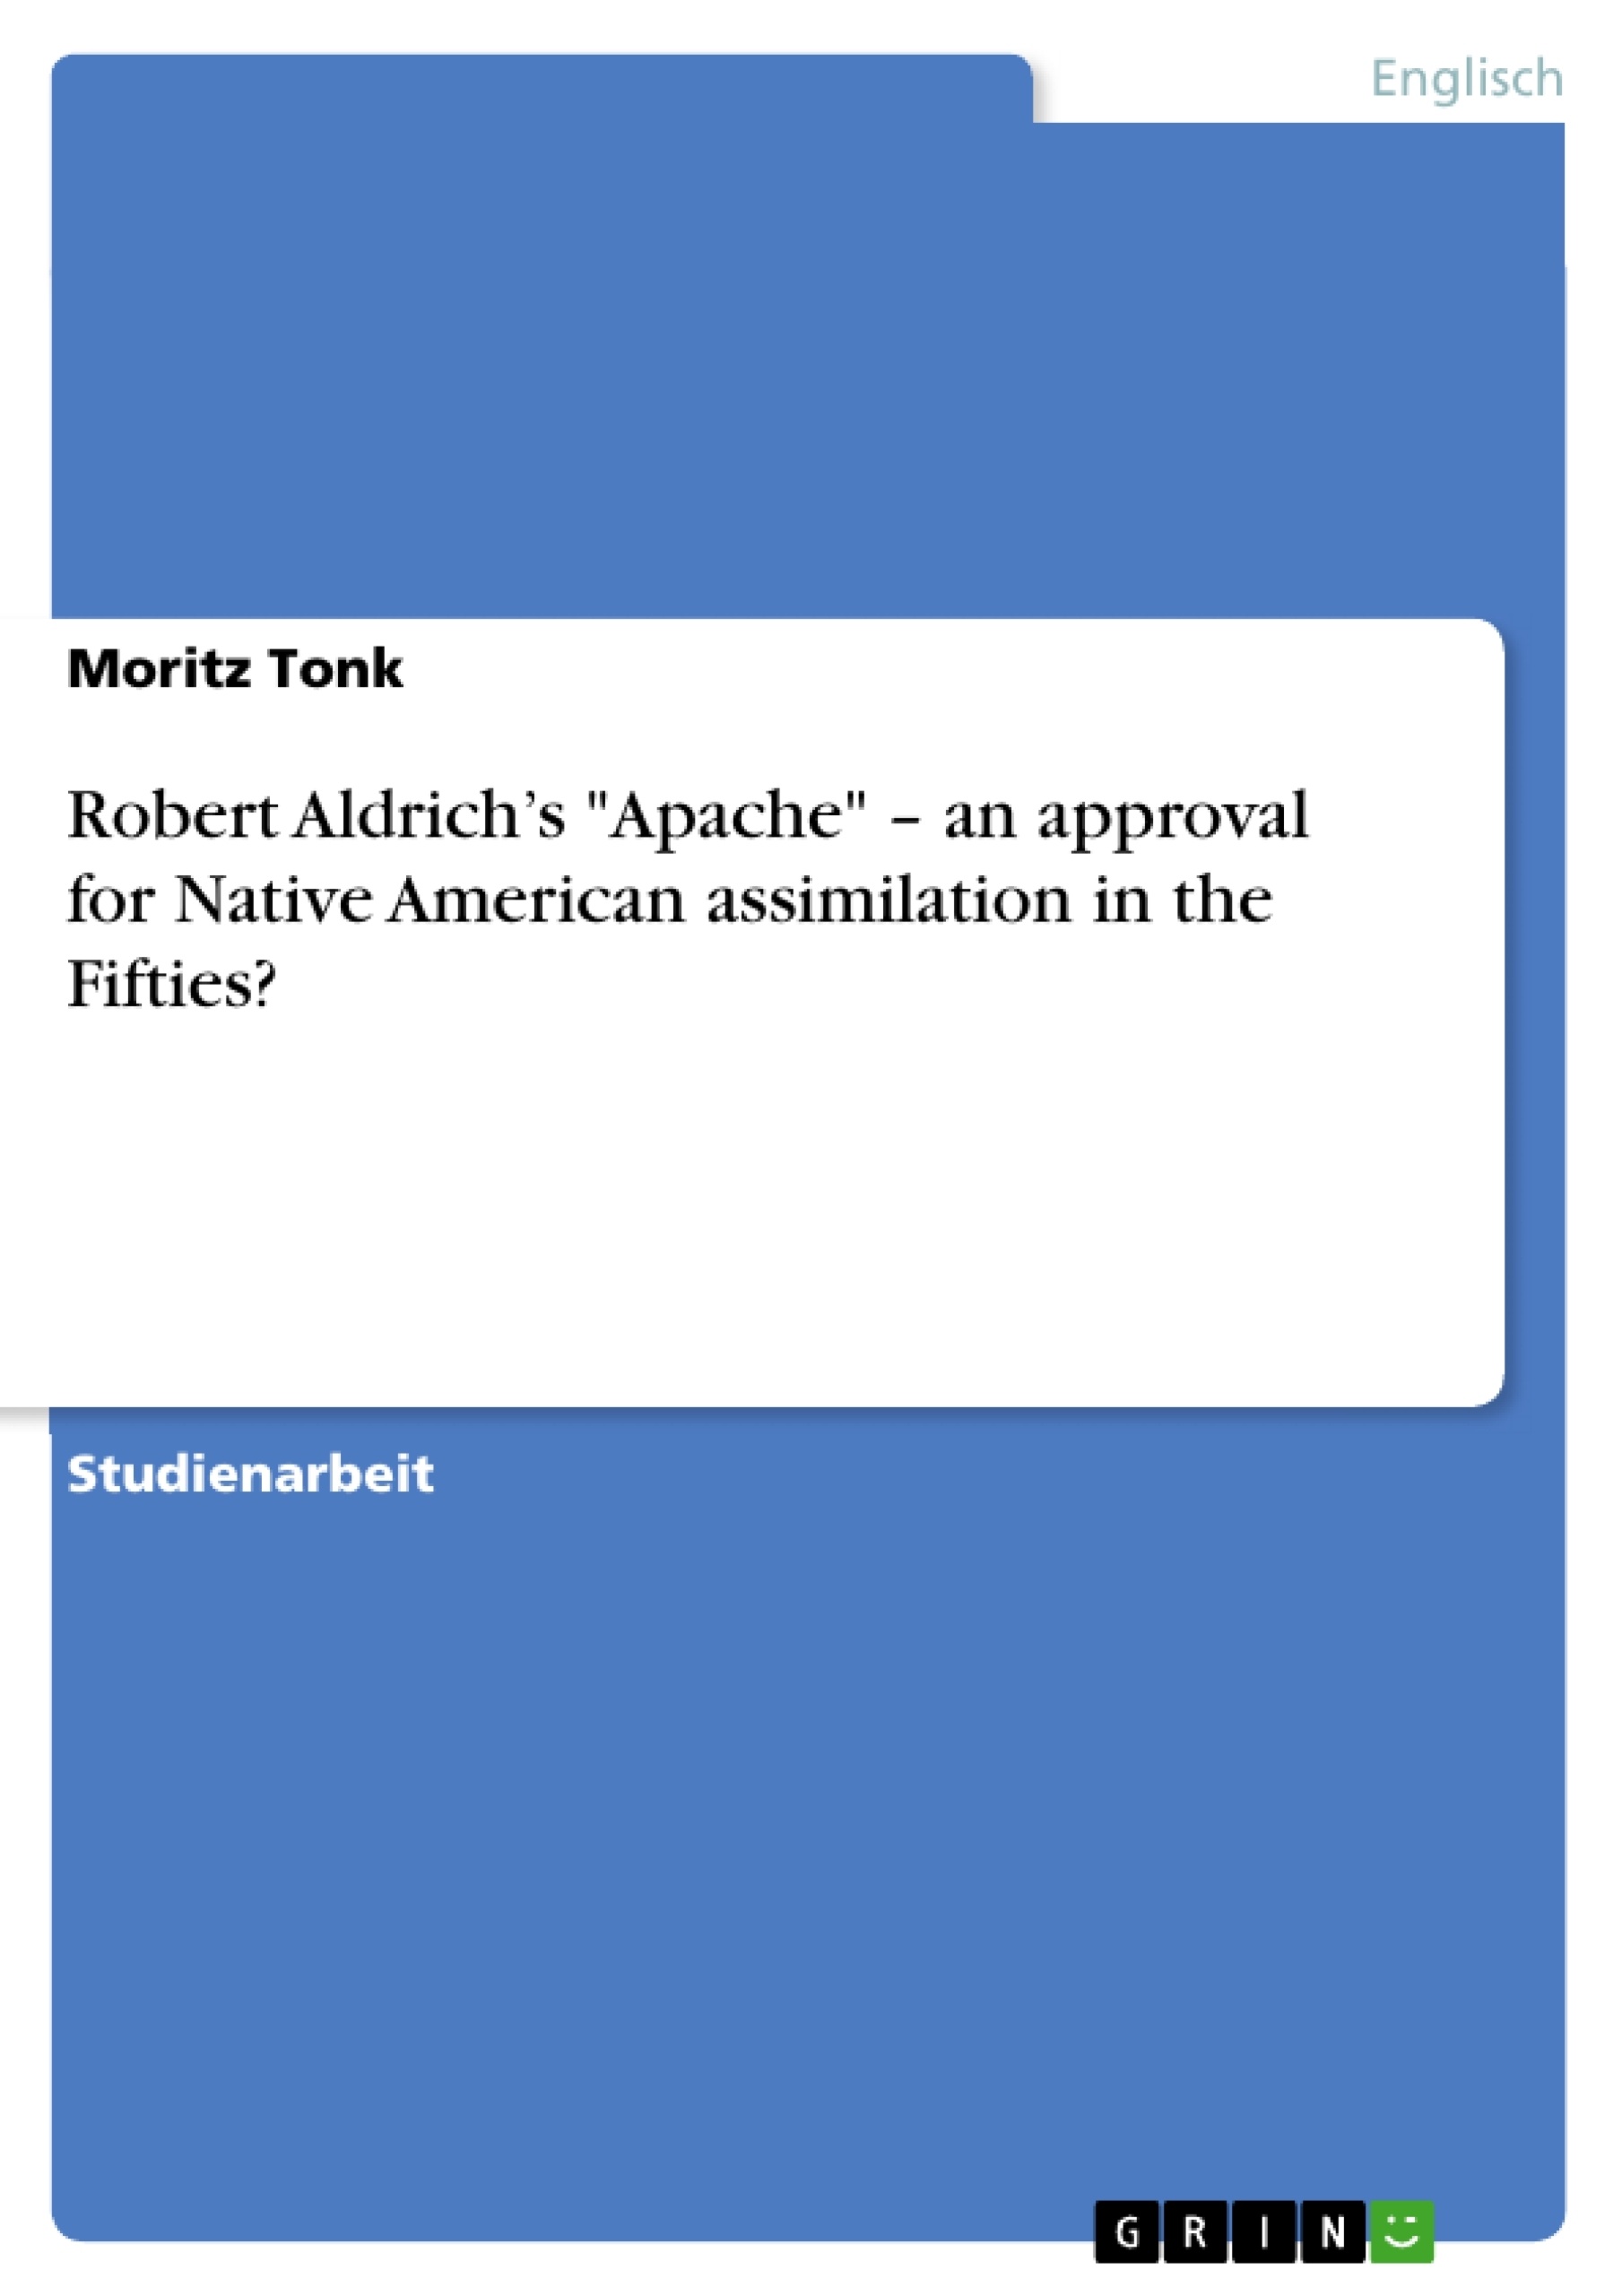 Titel: Robert Aldrich’s "Apache" – an approval for Native American assimilation in the Fifties?